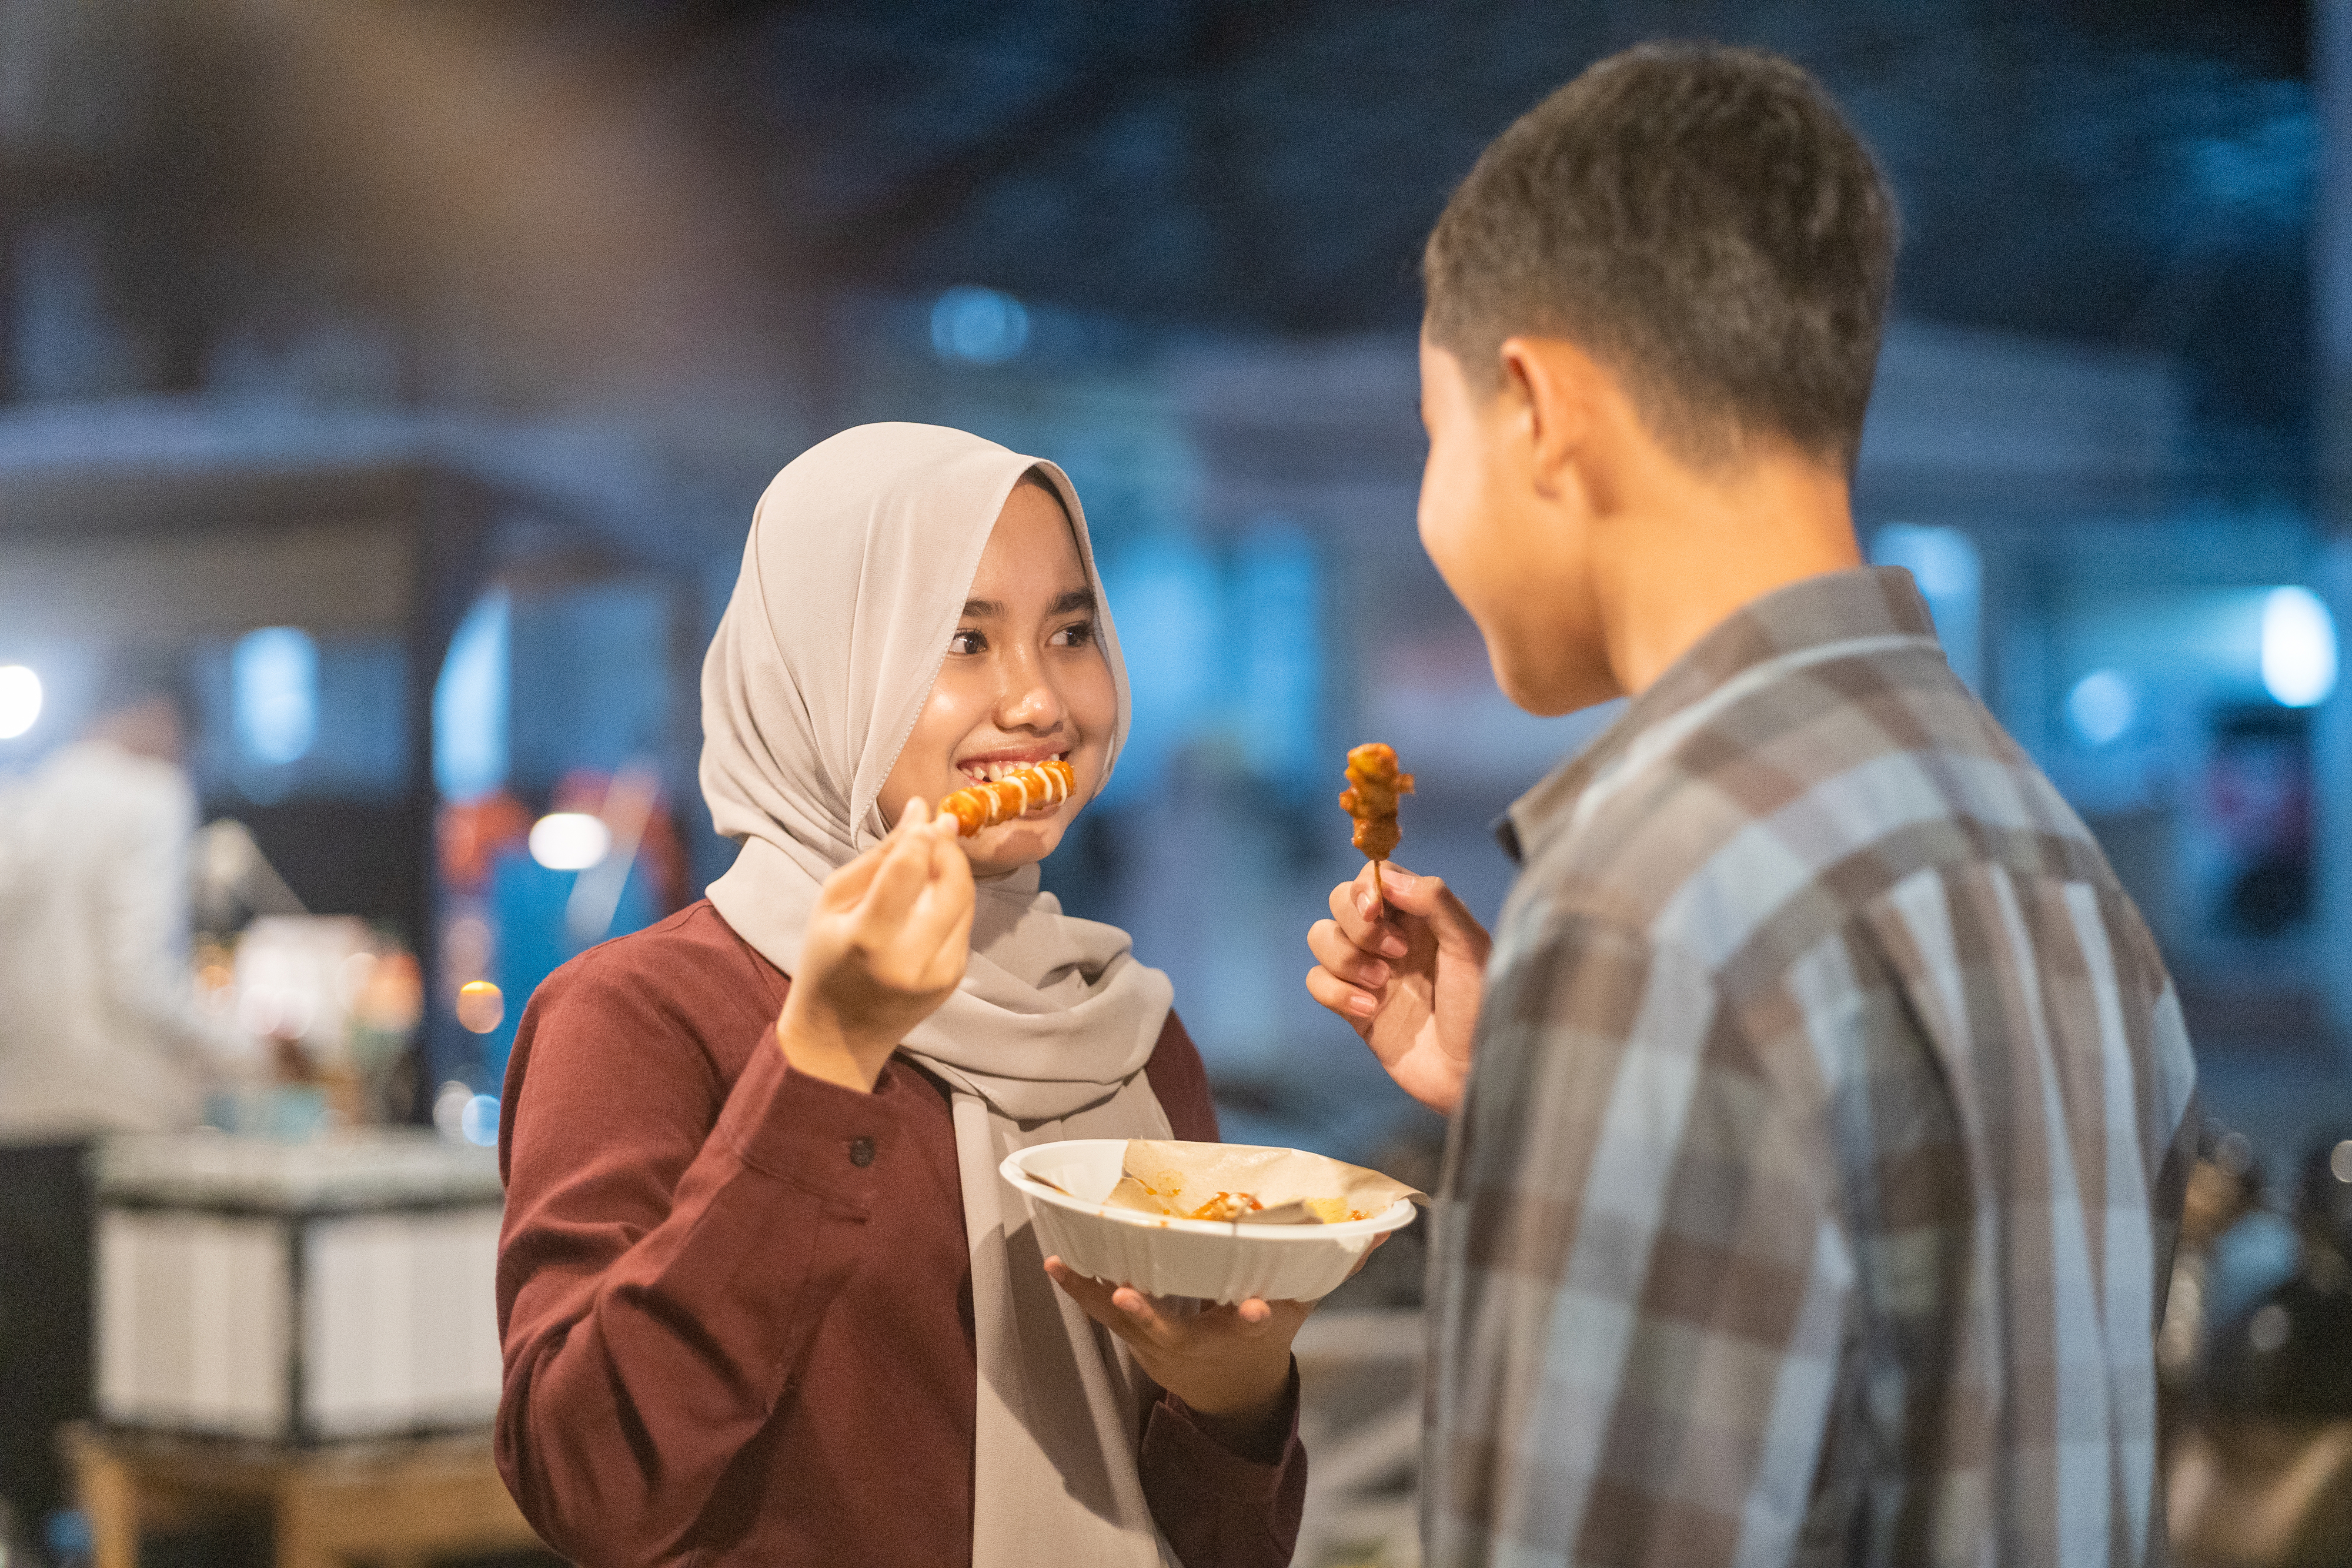 A woman and a man are sharing a meal outdoors. She is holding a skewer of food, smiling, and facing the man who is also holding a skewer